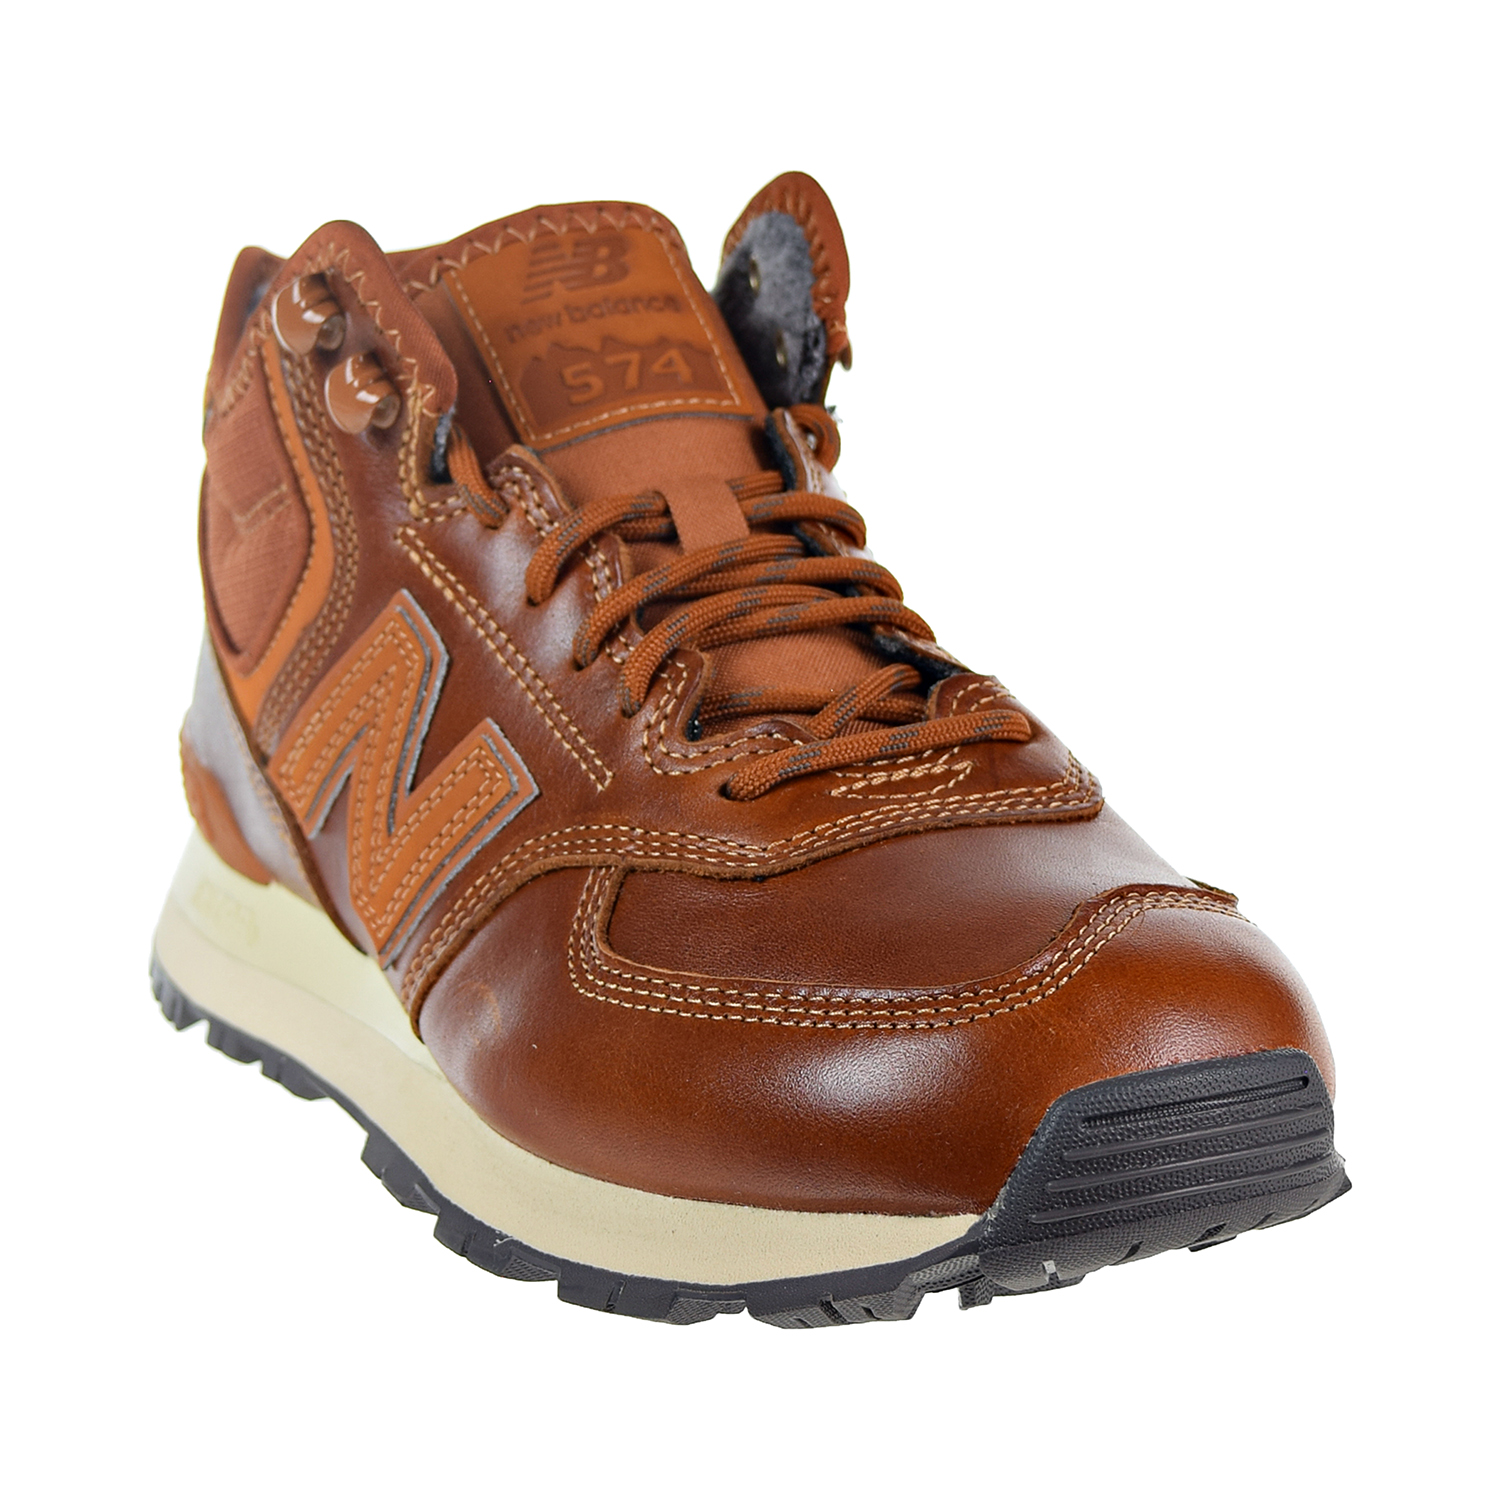 new balance 574 brown leather, OFF 72%,Buy!